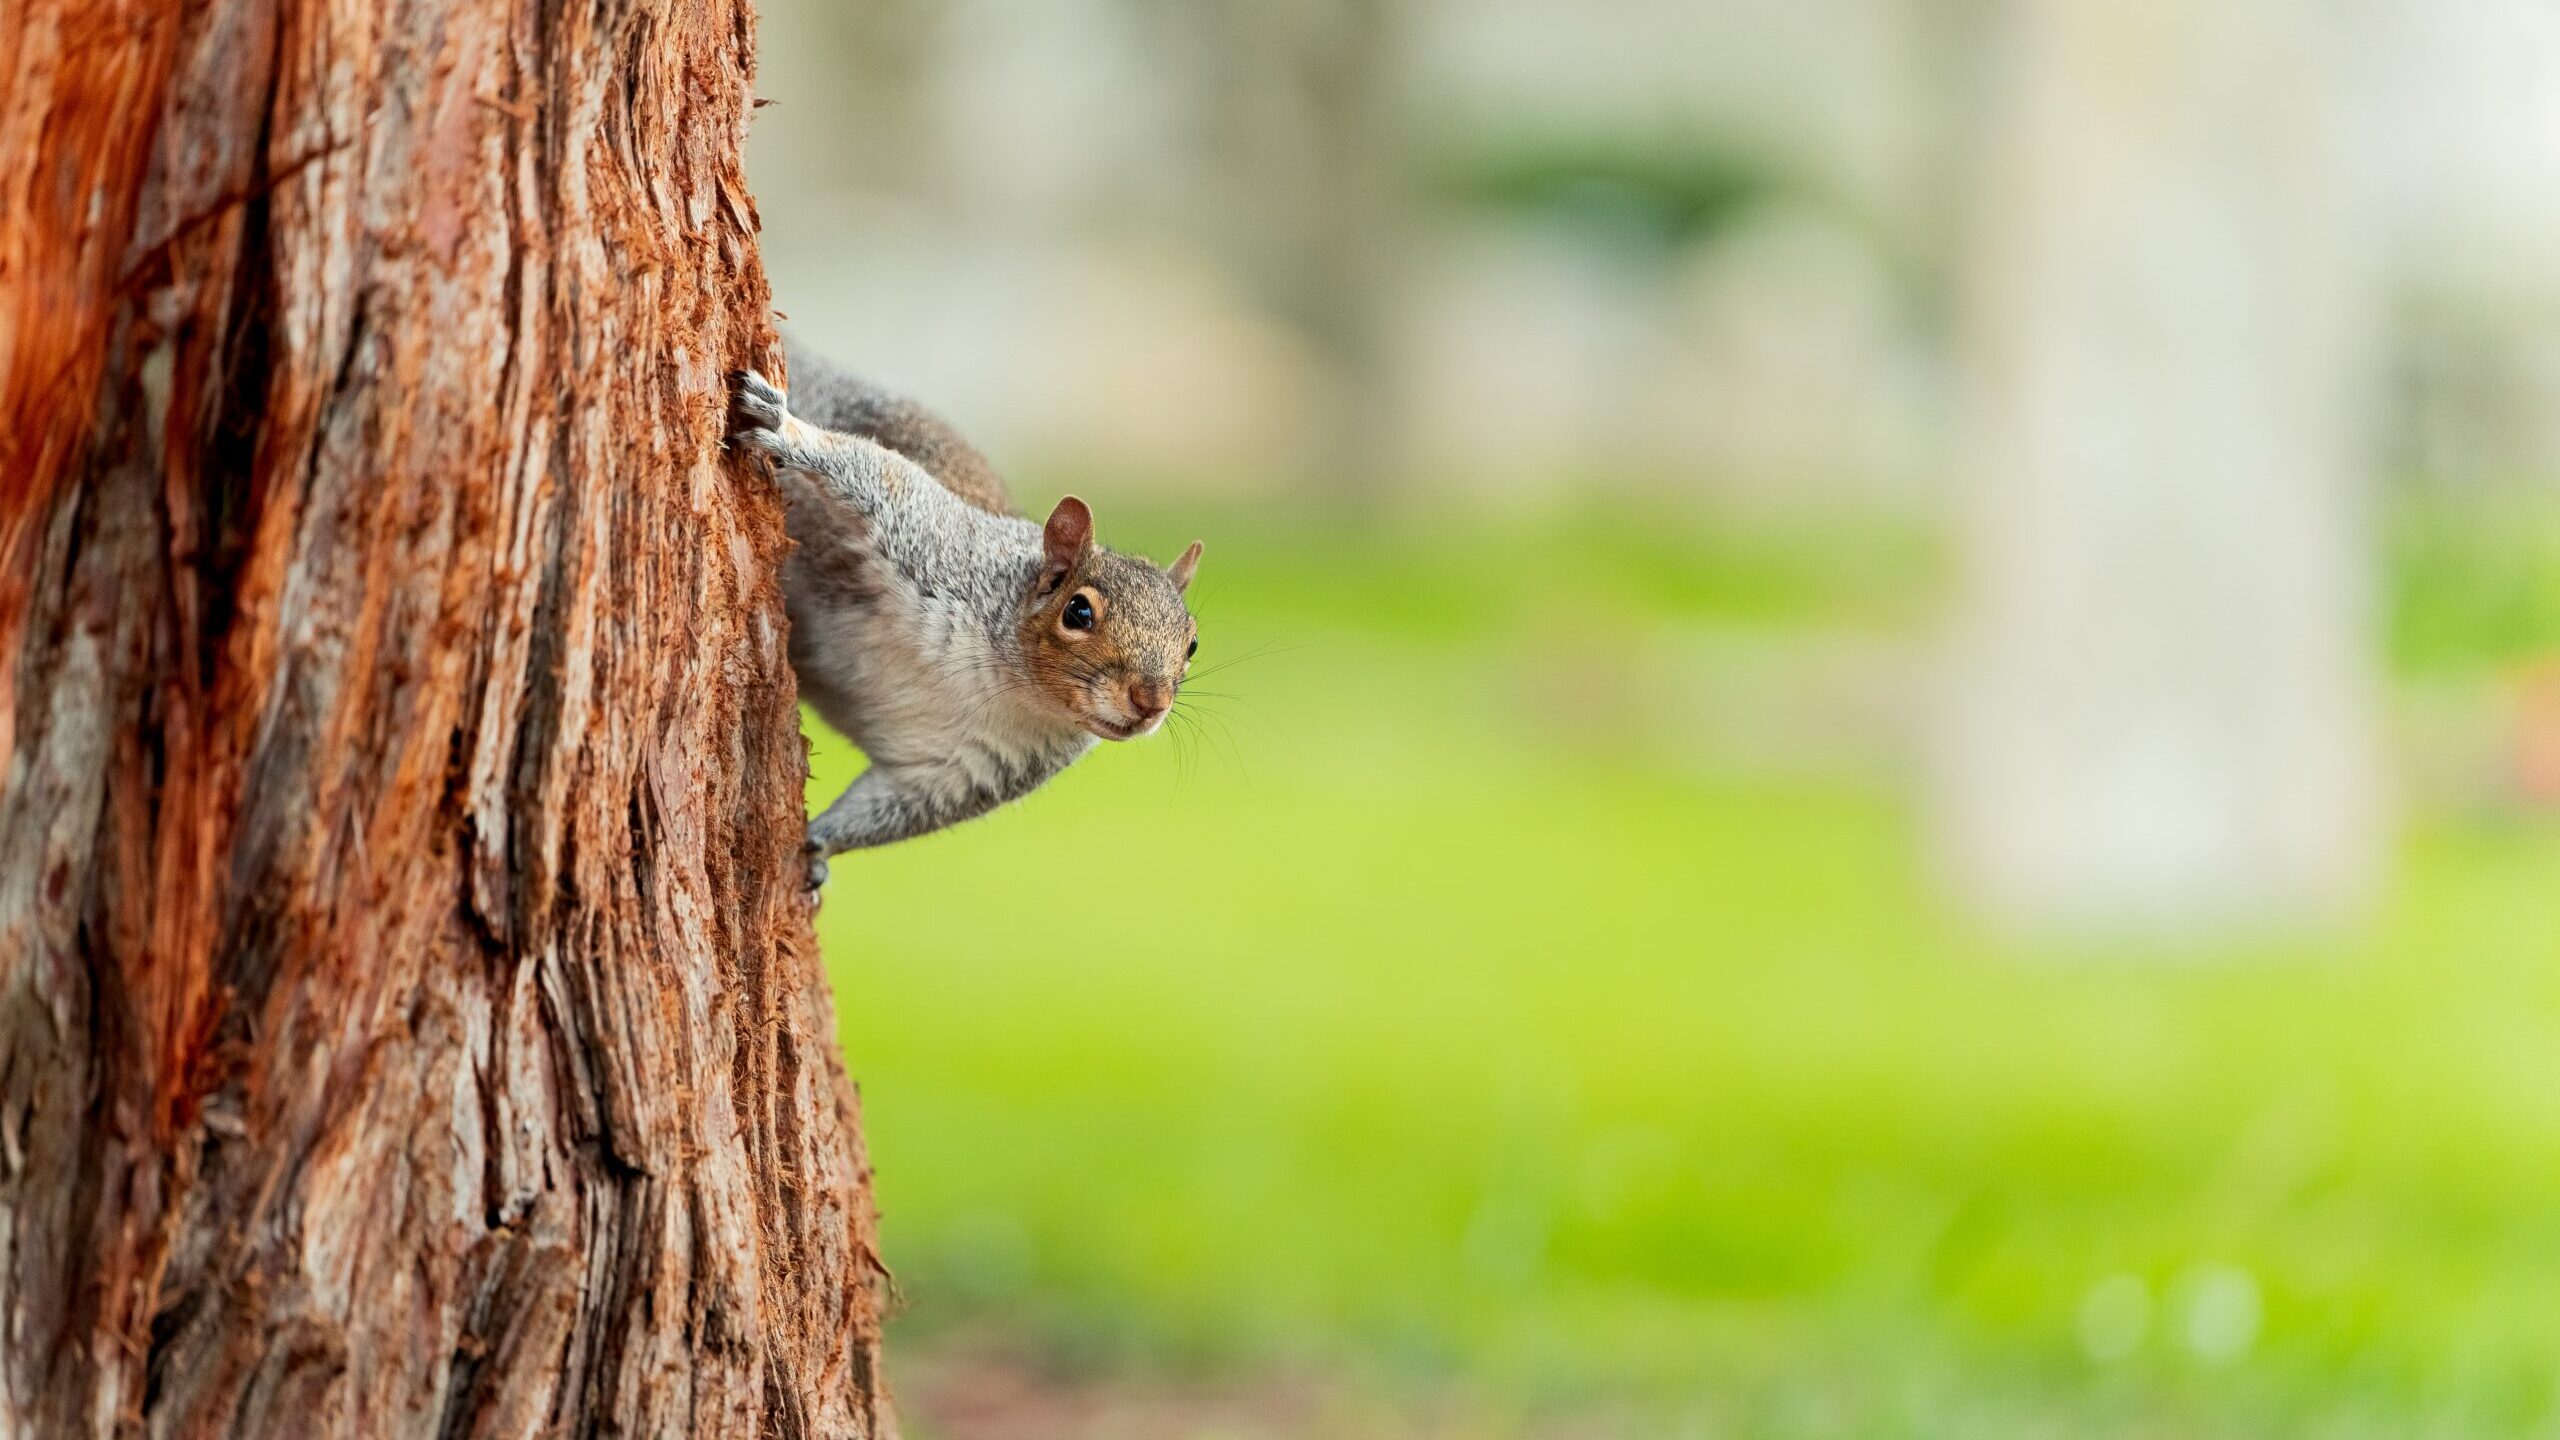 A squirrel clings to the trunk of a tree.